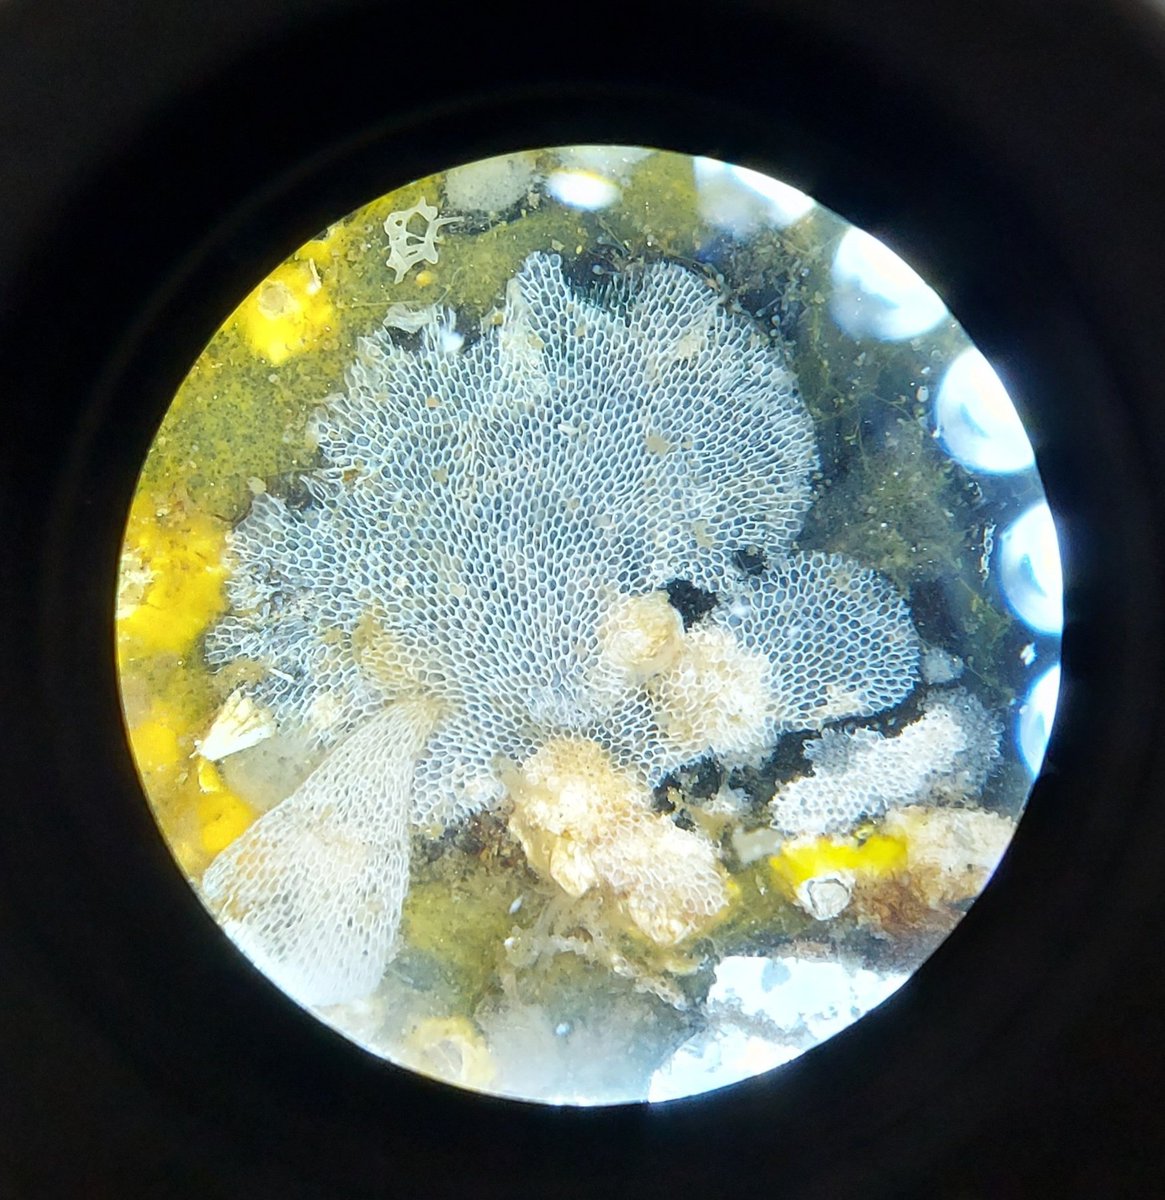 Flustra foliacea encrusting a mytilus shell. I never saw it doing this, but tbh is my first season around live bryozoans 😅
I wish I had someone here to consult with, but I'm the only person working on bryozoans on WSBS...